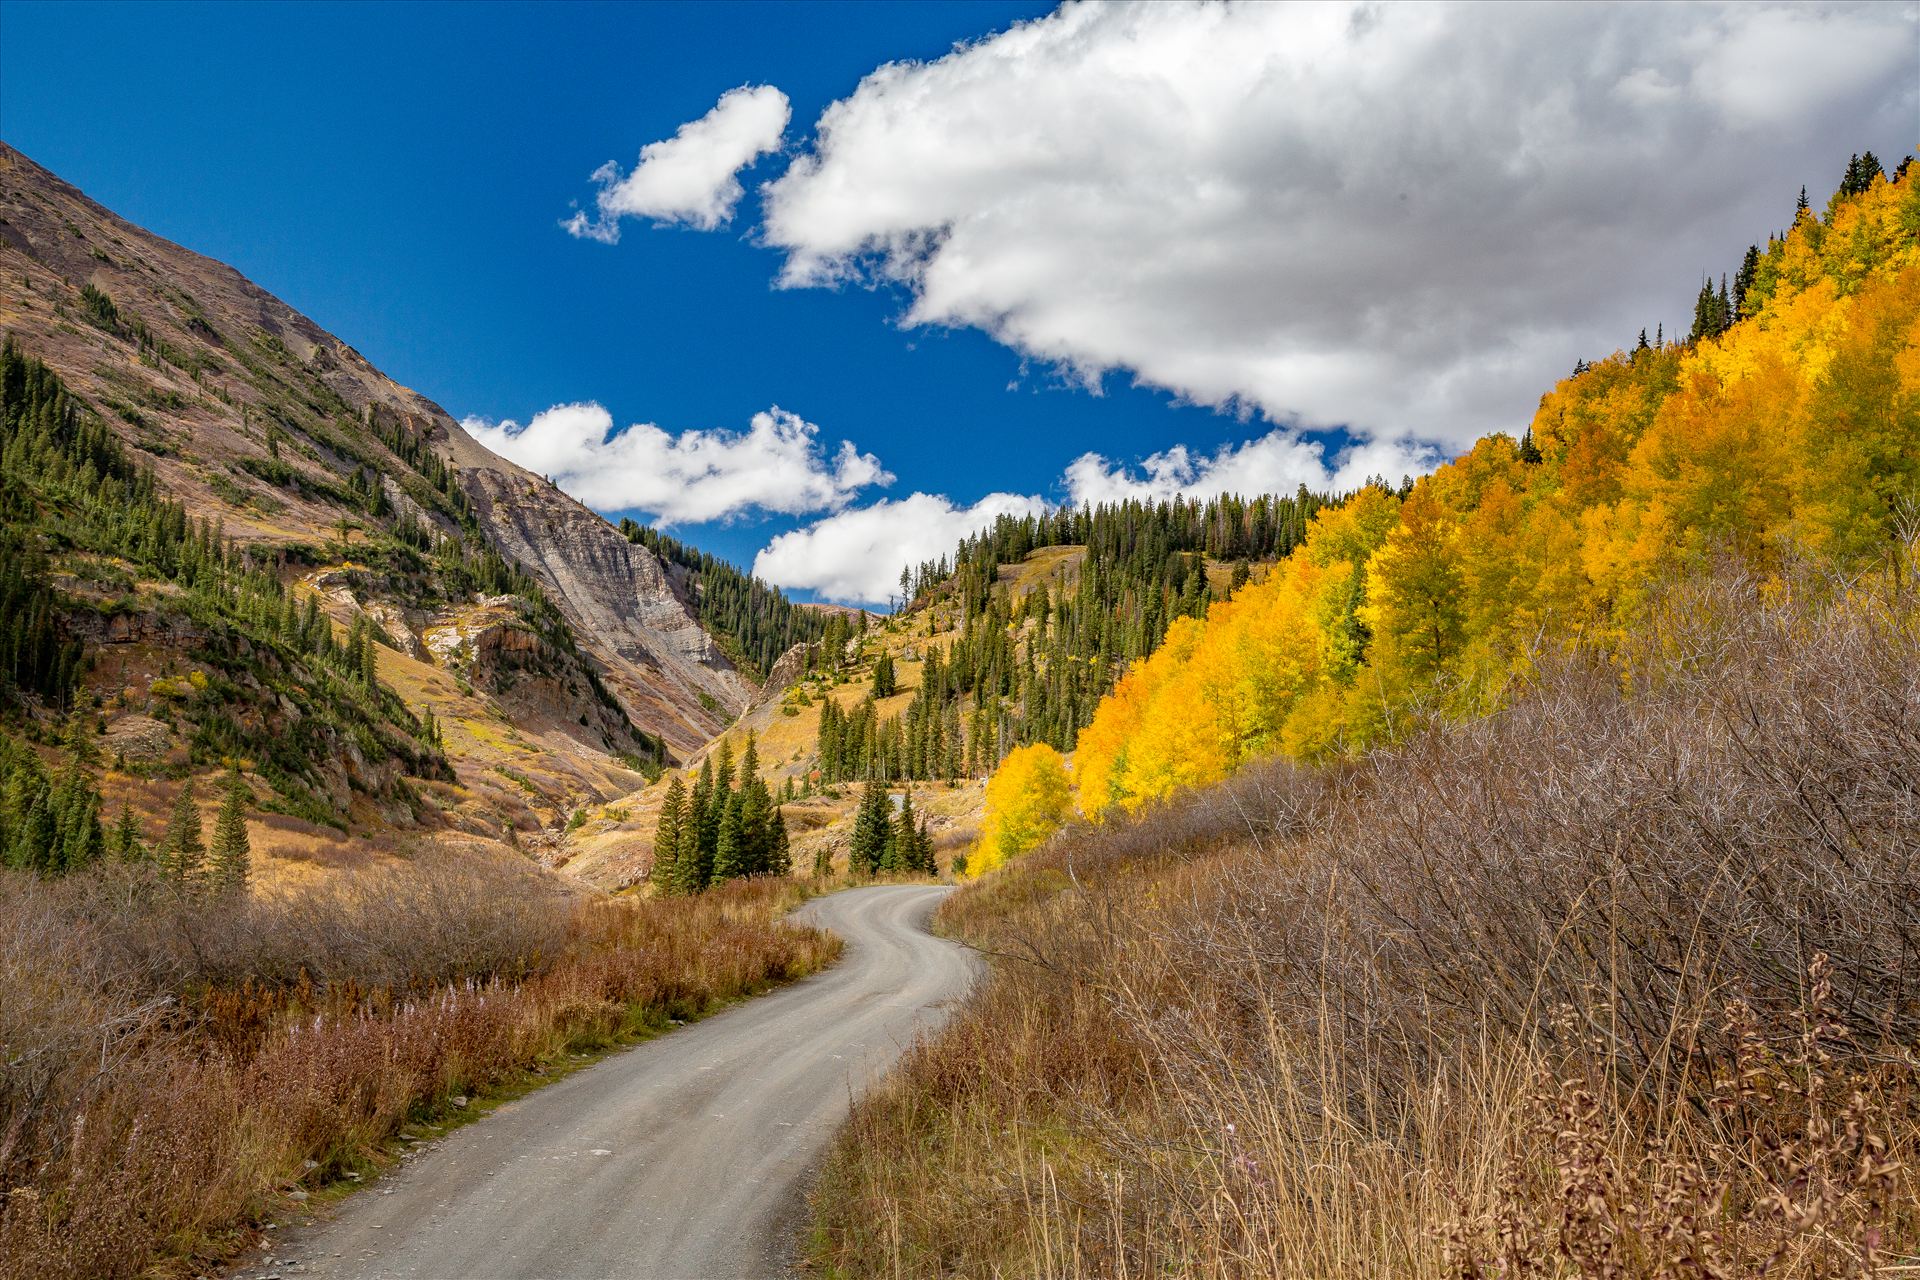 Schofield Pass - Fall colors and bluebird skies Just before Emerald Lake on Schofield Pass, near Crested Butte, Colorado. by Scott Smith Photos